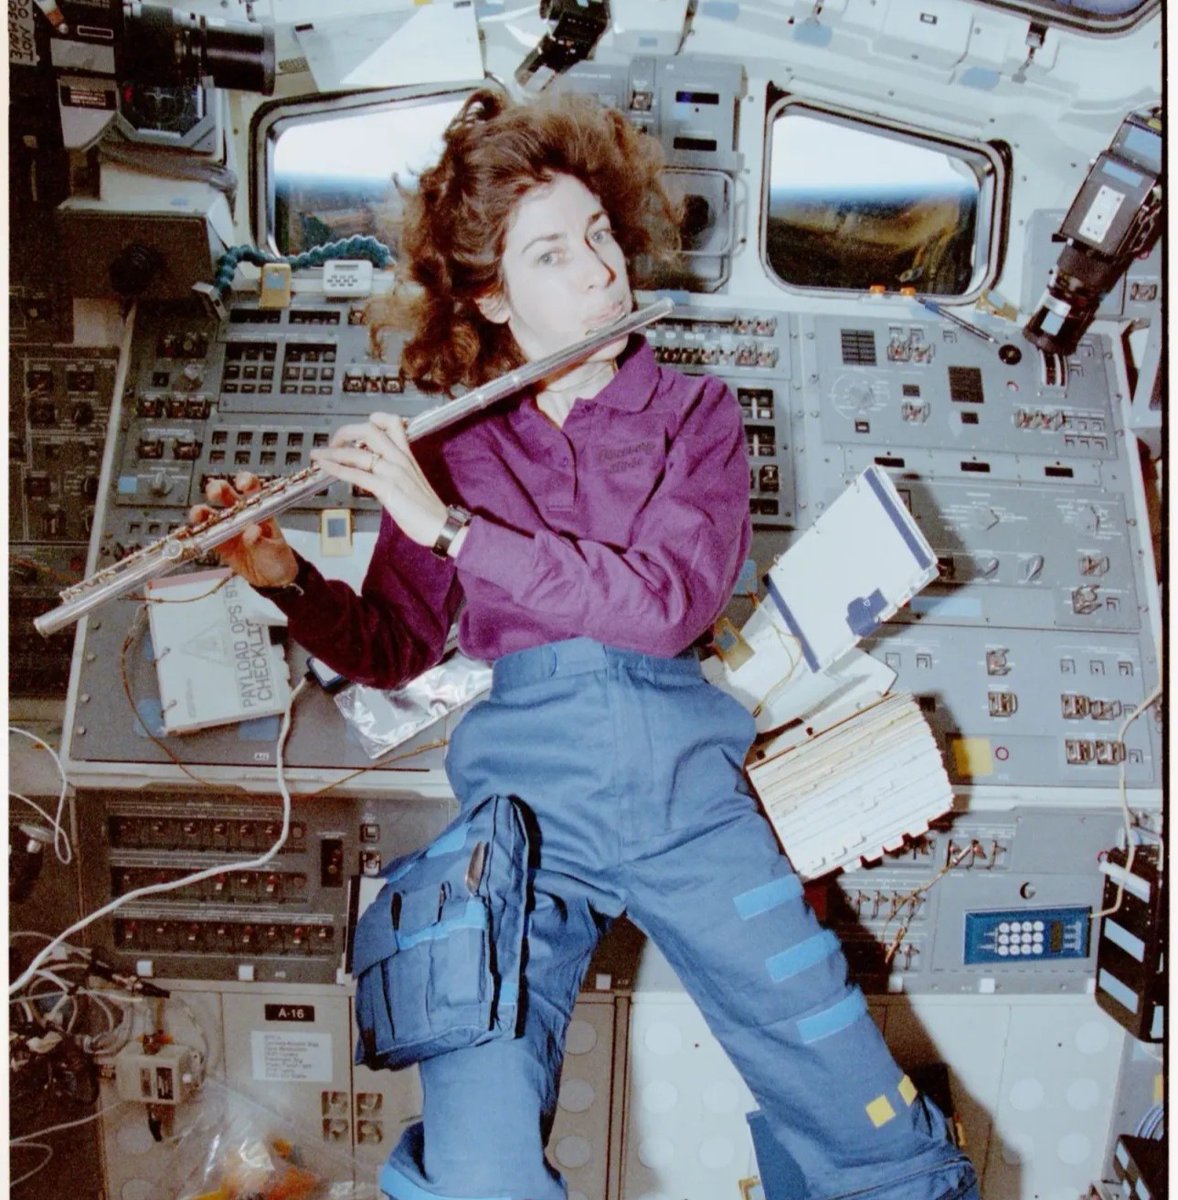 On April 8, 1993, Ellen Ochoa became the first Mexican American in space. “Don’t be afraid to reach for the stars…a good education can take you anywhere on Earth and beyond.” Learn more about her career here: text-message.blogs.archives.gov/2021/06/10/ell… #HispanicHeritageMonth